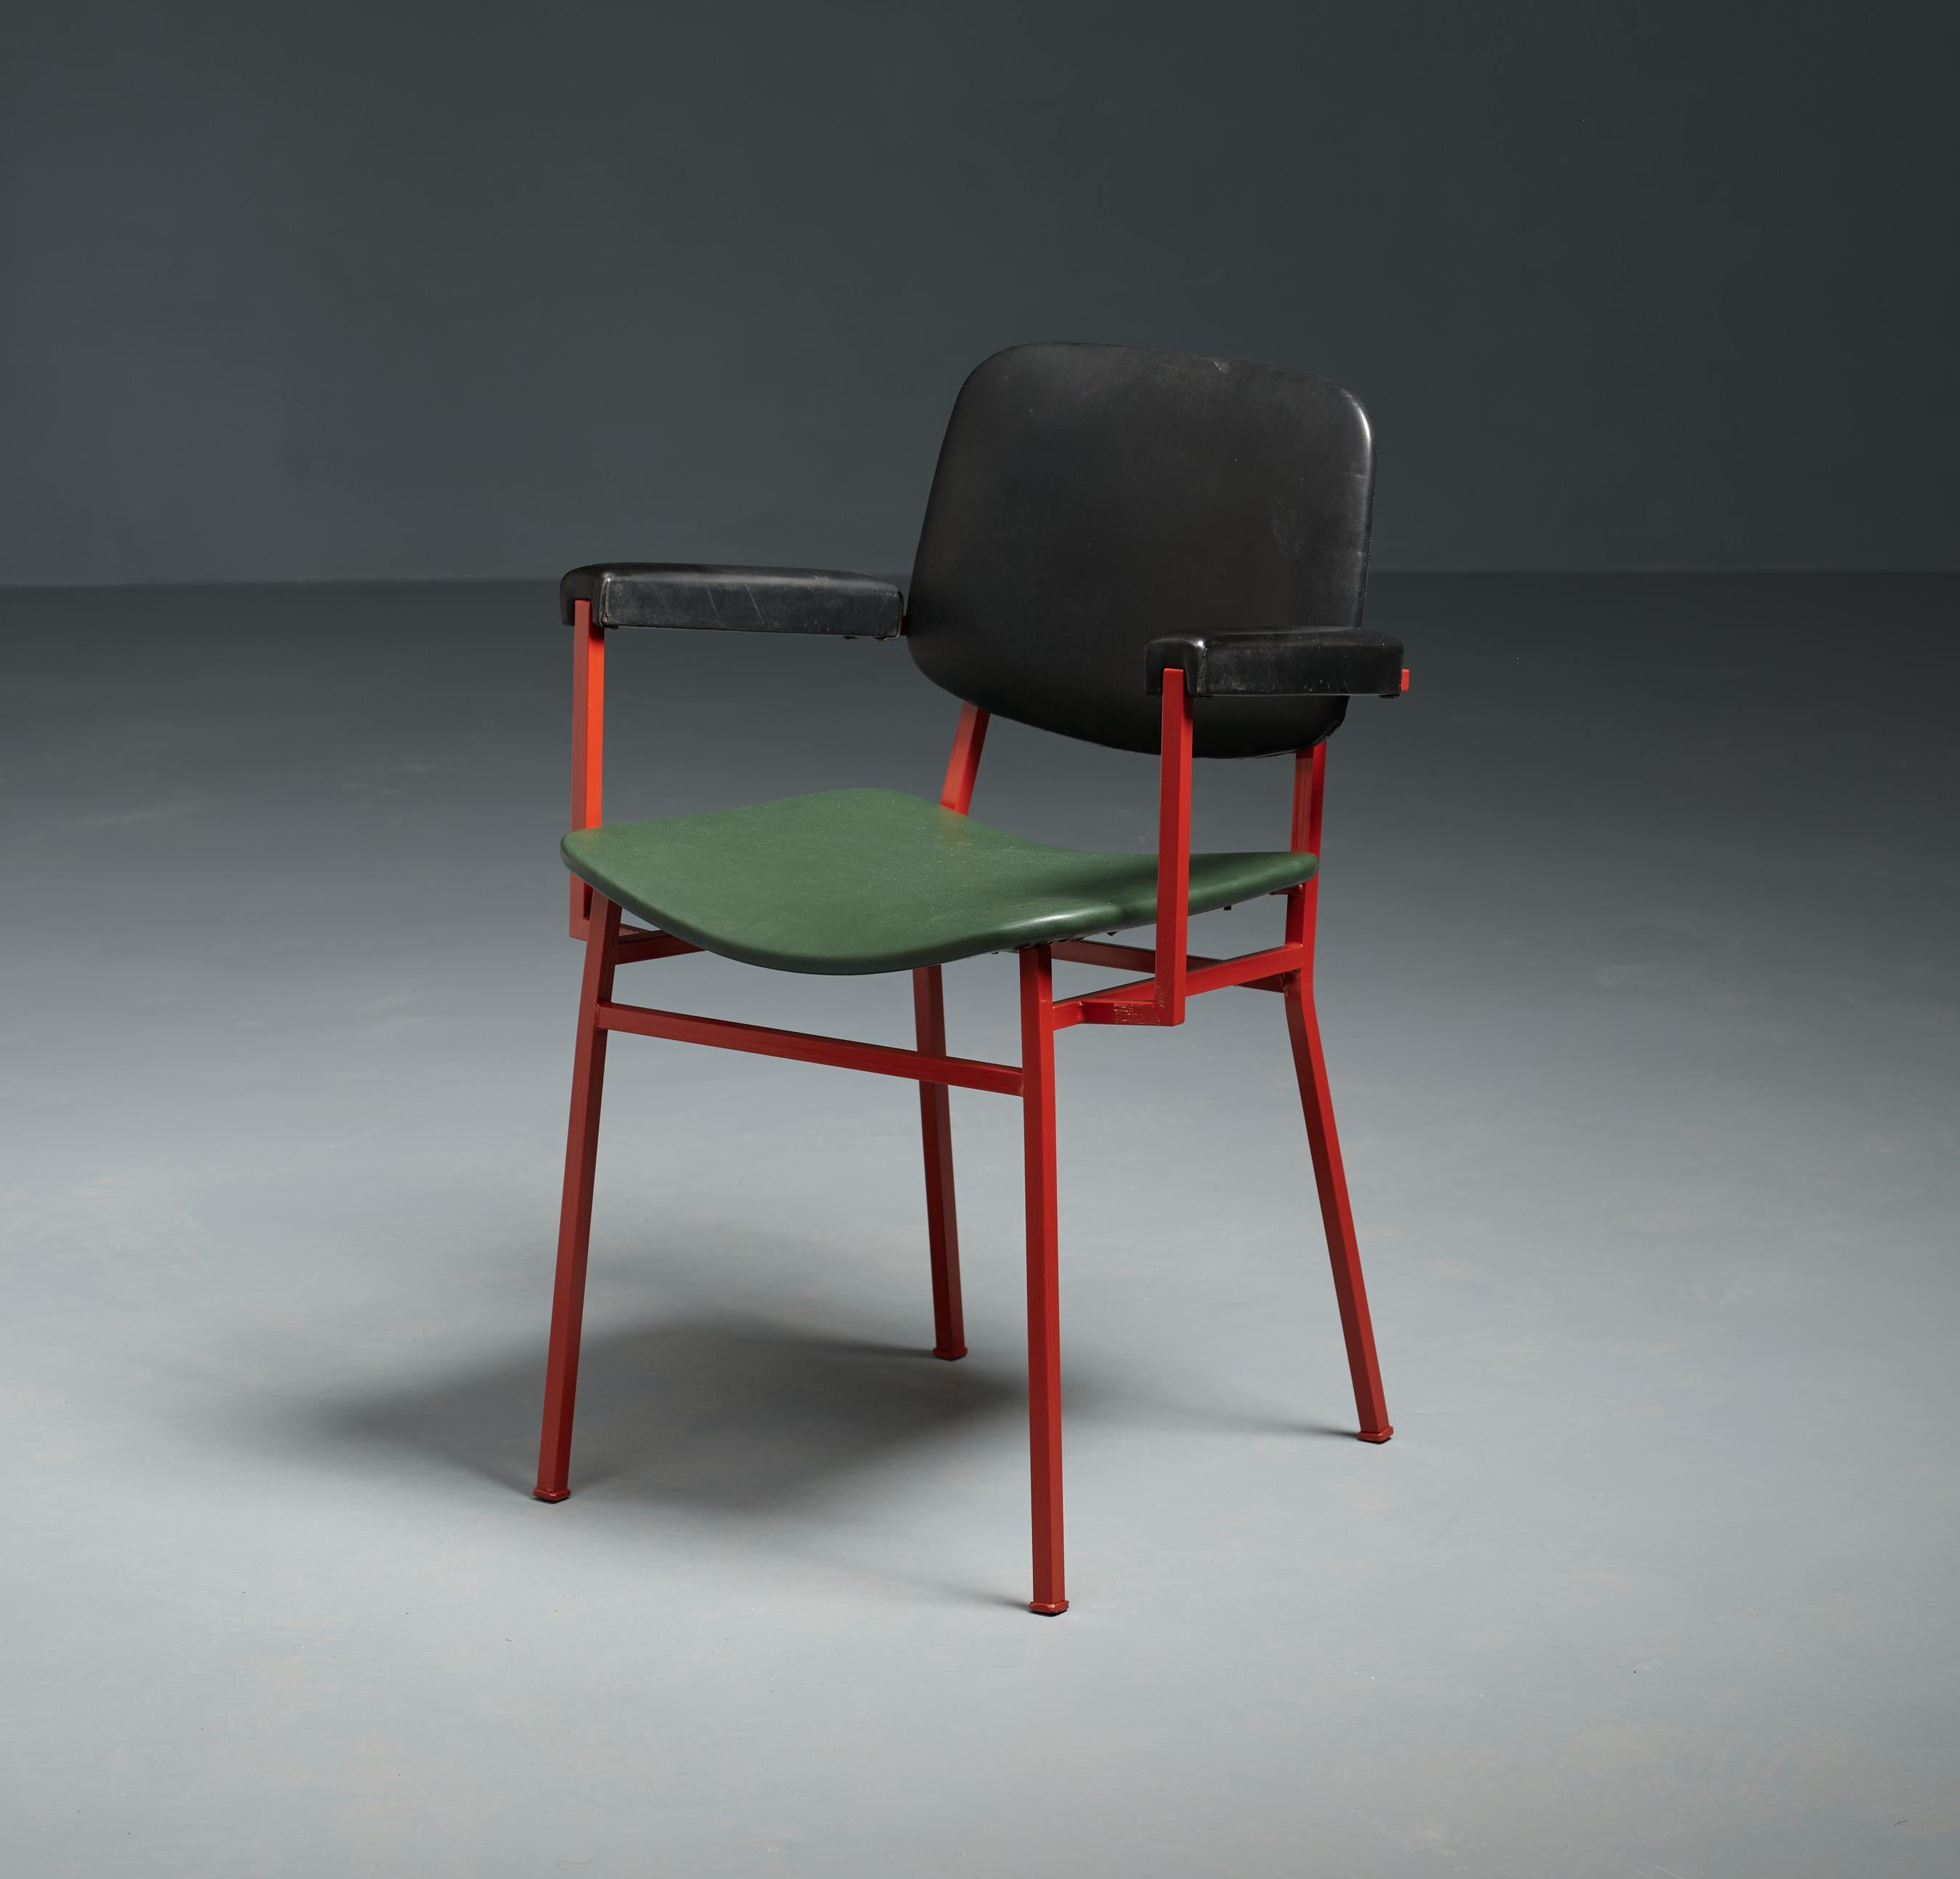 Step back in time to the stylish 1950s with this Italian midcentury desk chair. Crafted with meticulous attention to detail, this chair features a sturdy square-sectioned tubular iron frame, beautifully lacquered in vibrant red. The black Skai arms